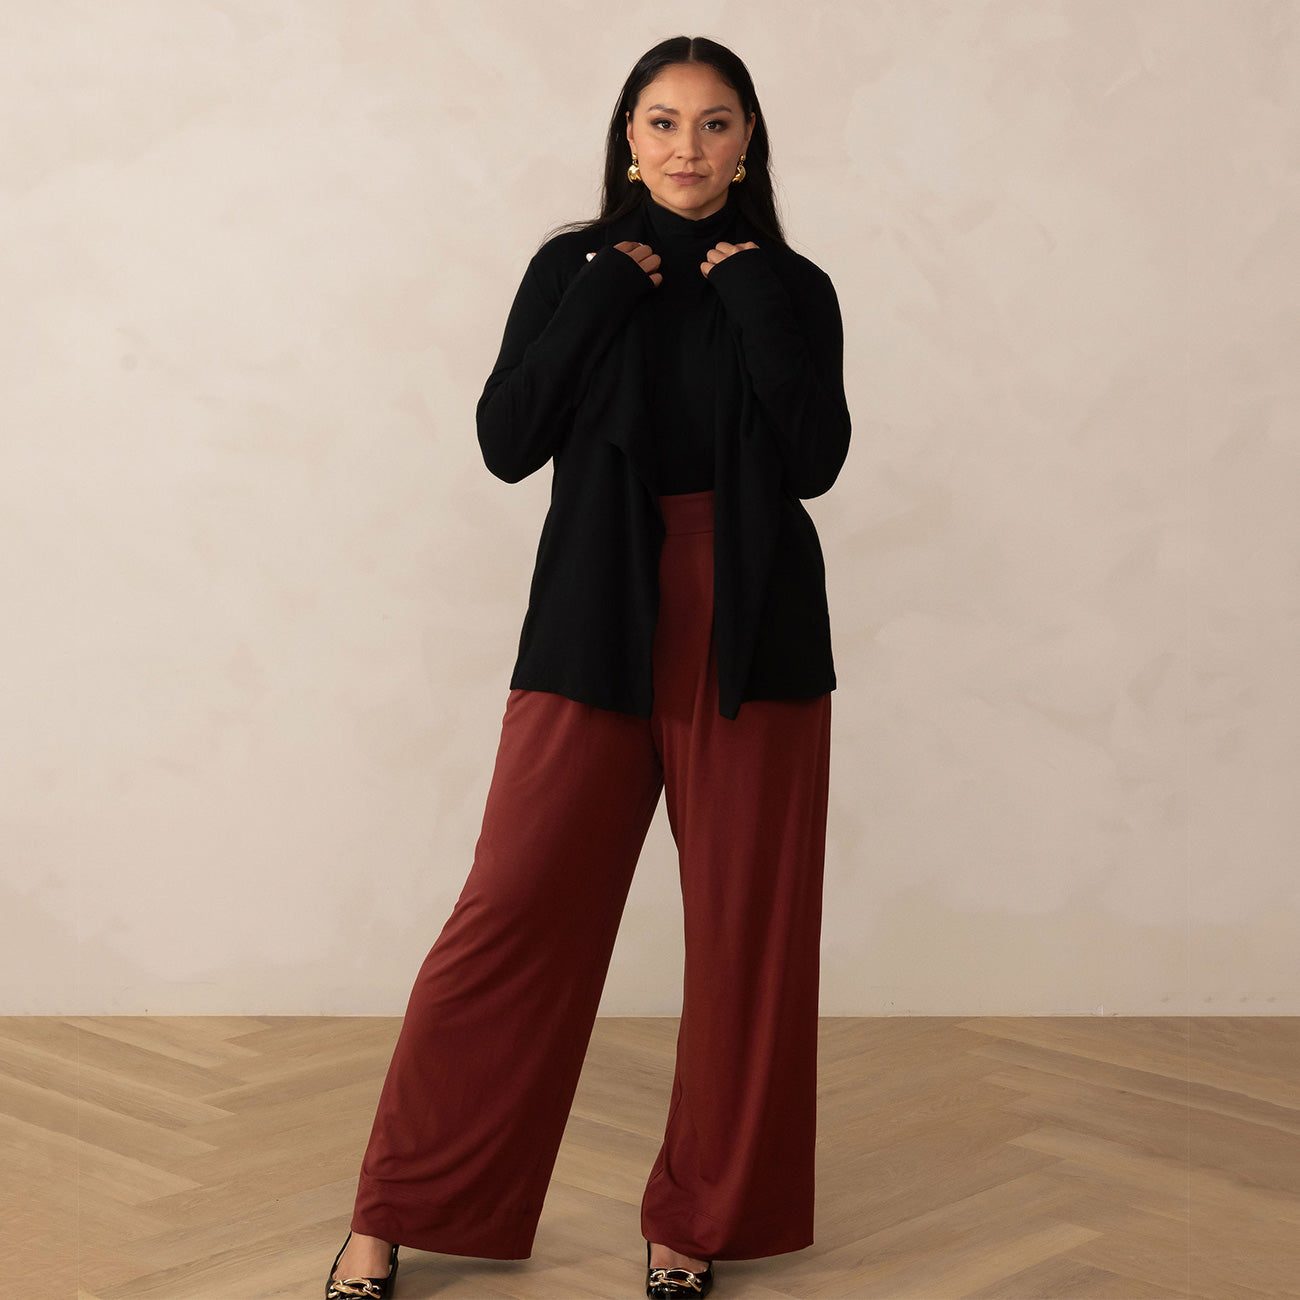 High-waisted Red Pants Elegant Palazzo Pants. Wide Leg Pants, Pants Skirt, Elegant  Trousers, Trousers With Pockets, Evening Pants -  Canada